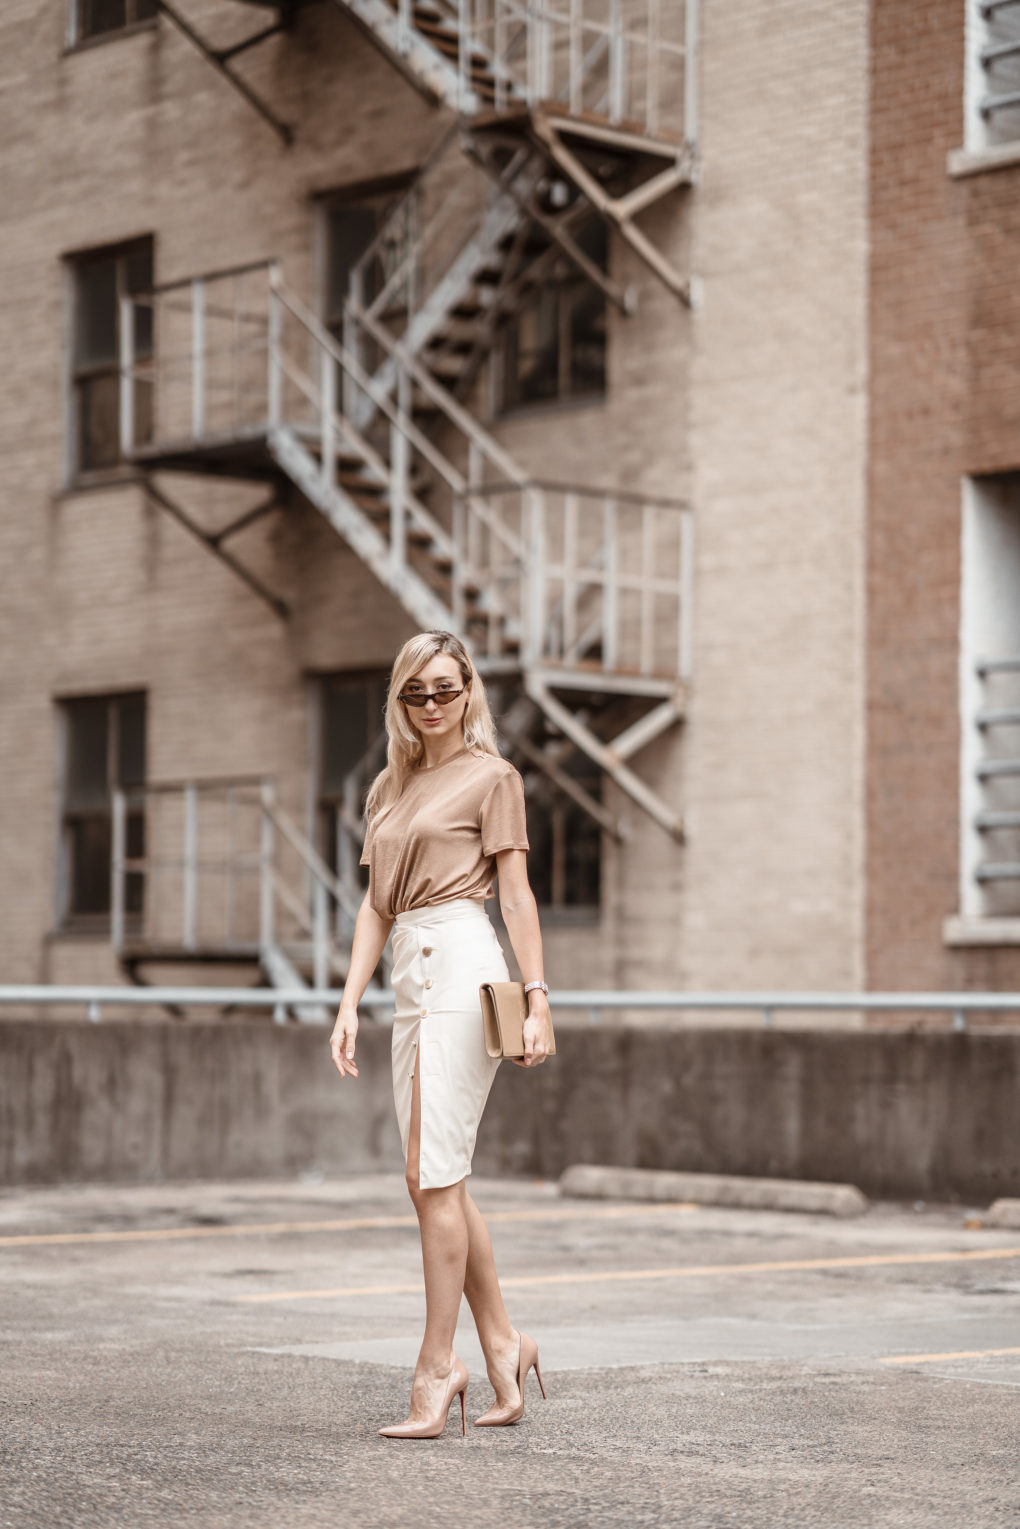 Styling a Pencil Skirt and T-Shirt